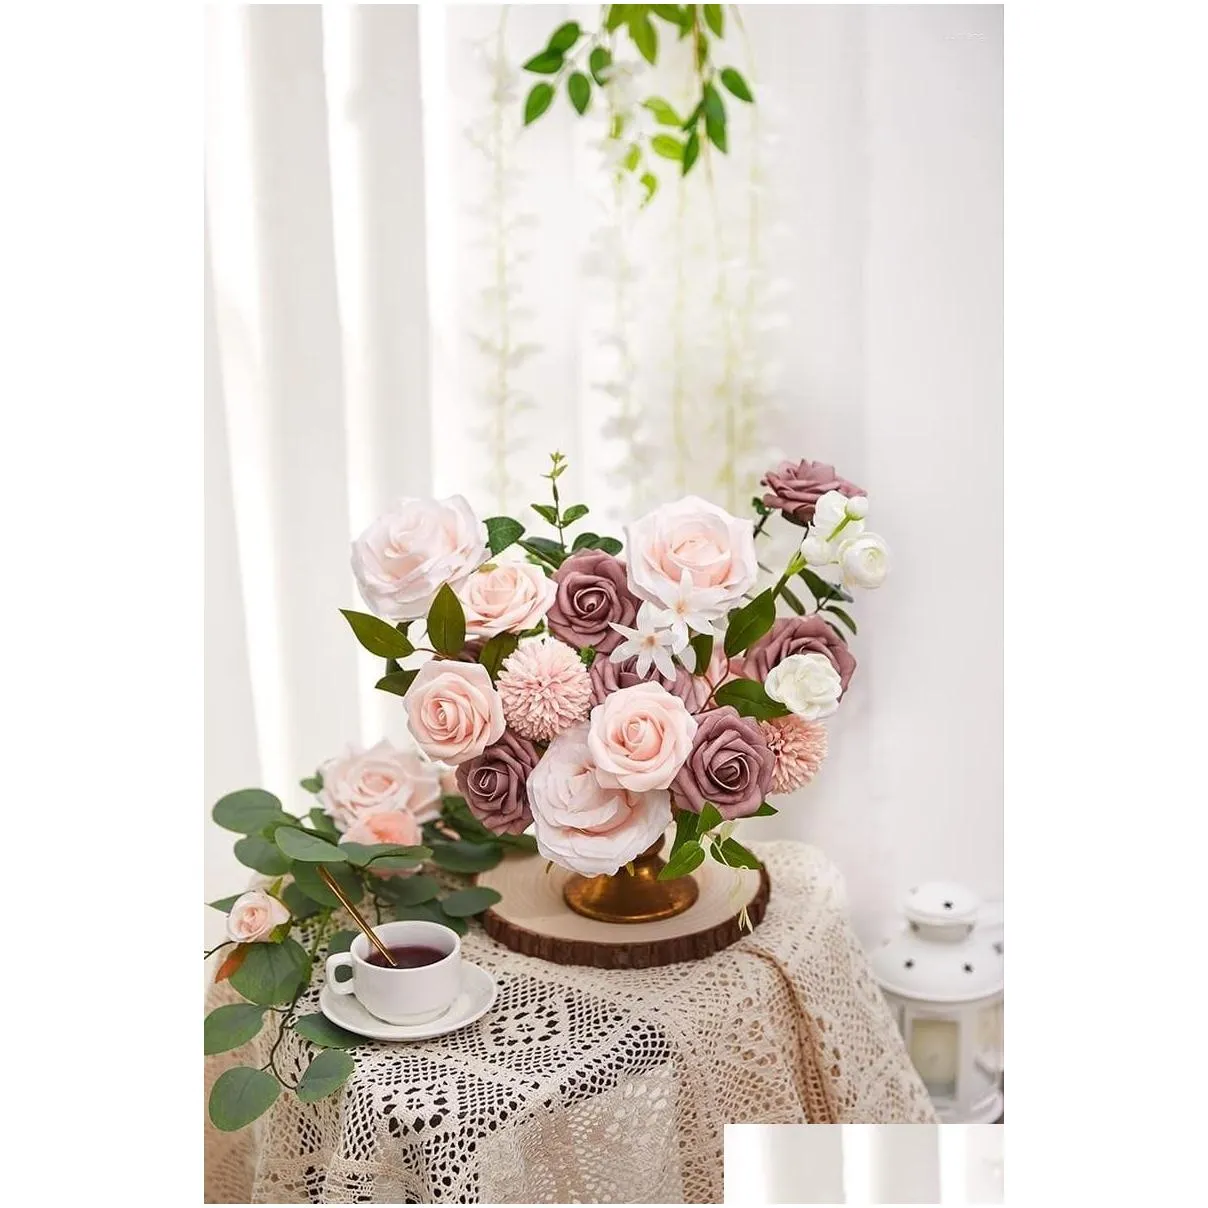 Decorative Flowers Artificial Box Set Silk Flower Foam Roses With Stems For DIY Wedding Bouquets Centerpieces Party Home Decorations